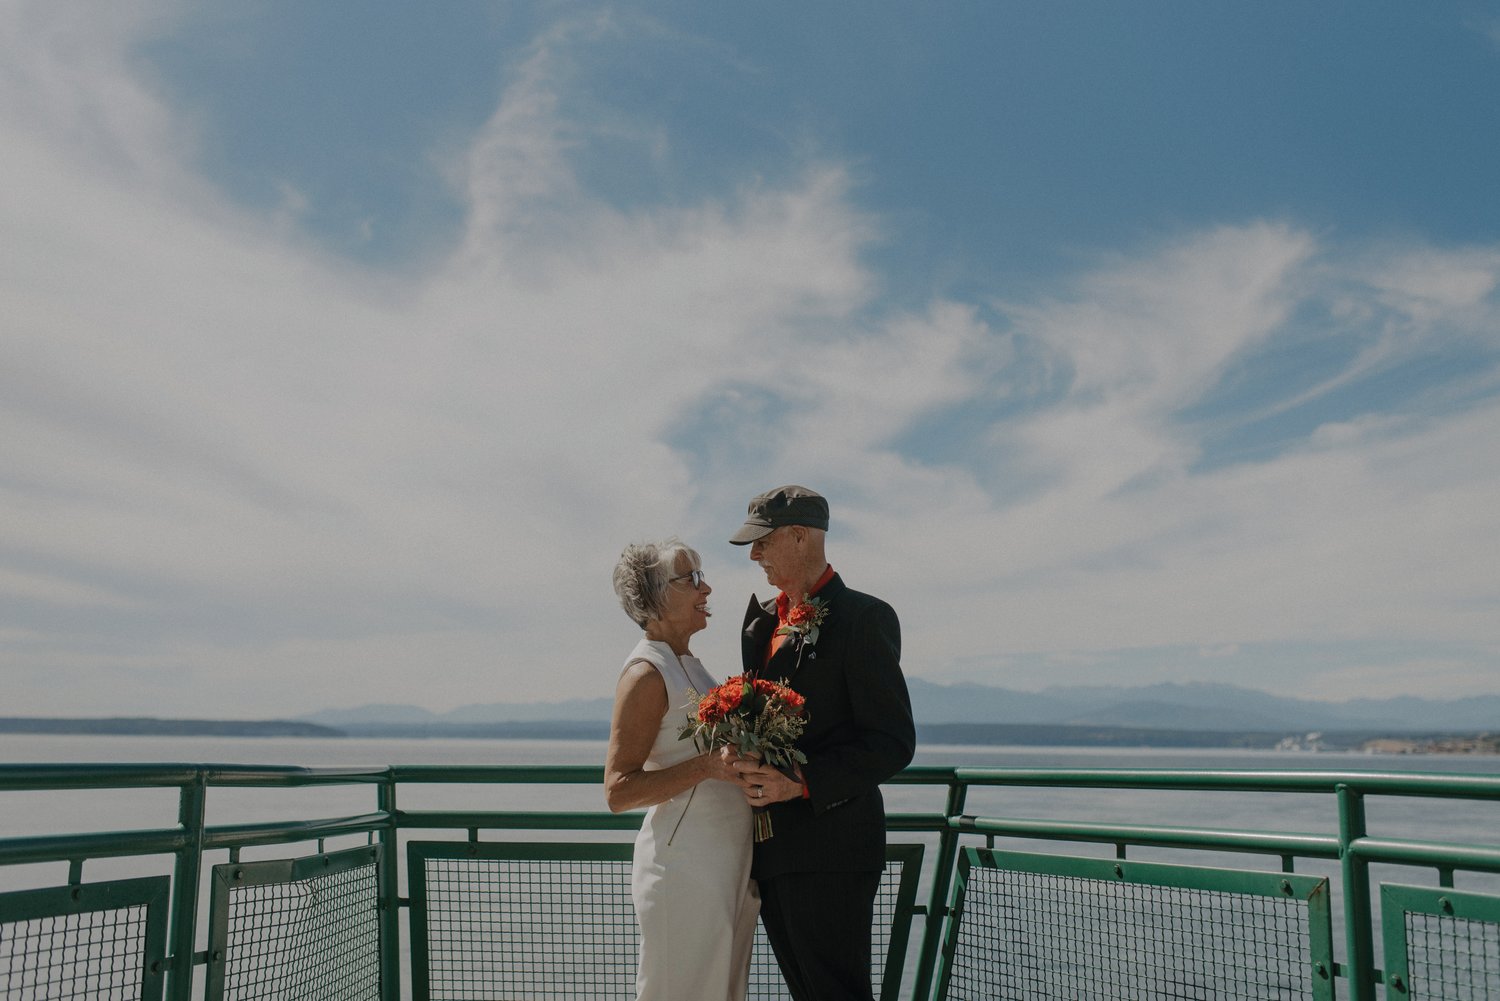 After spending so much time aboard the Port Townsend-Coupeville ferry during their courtship, Alan Johanson and Carol Heimgartner decided to get married on the boat last week.